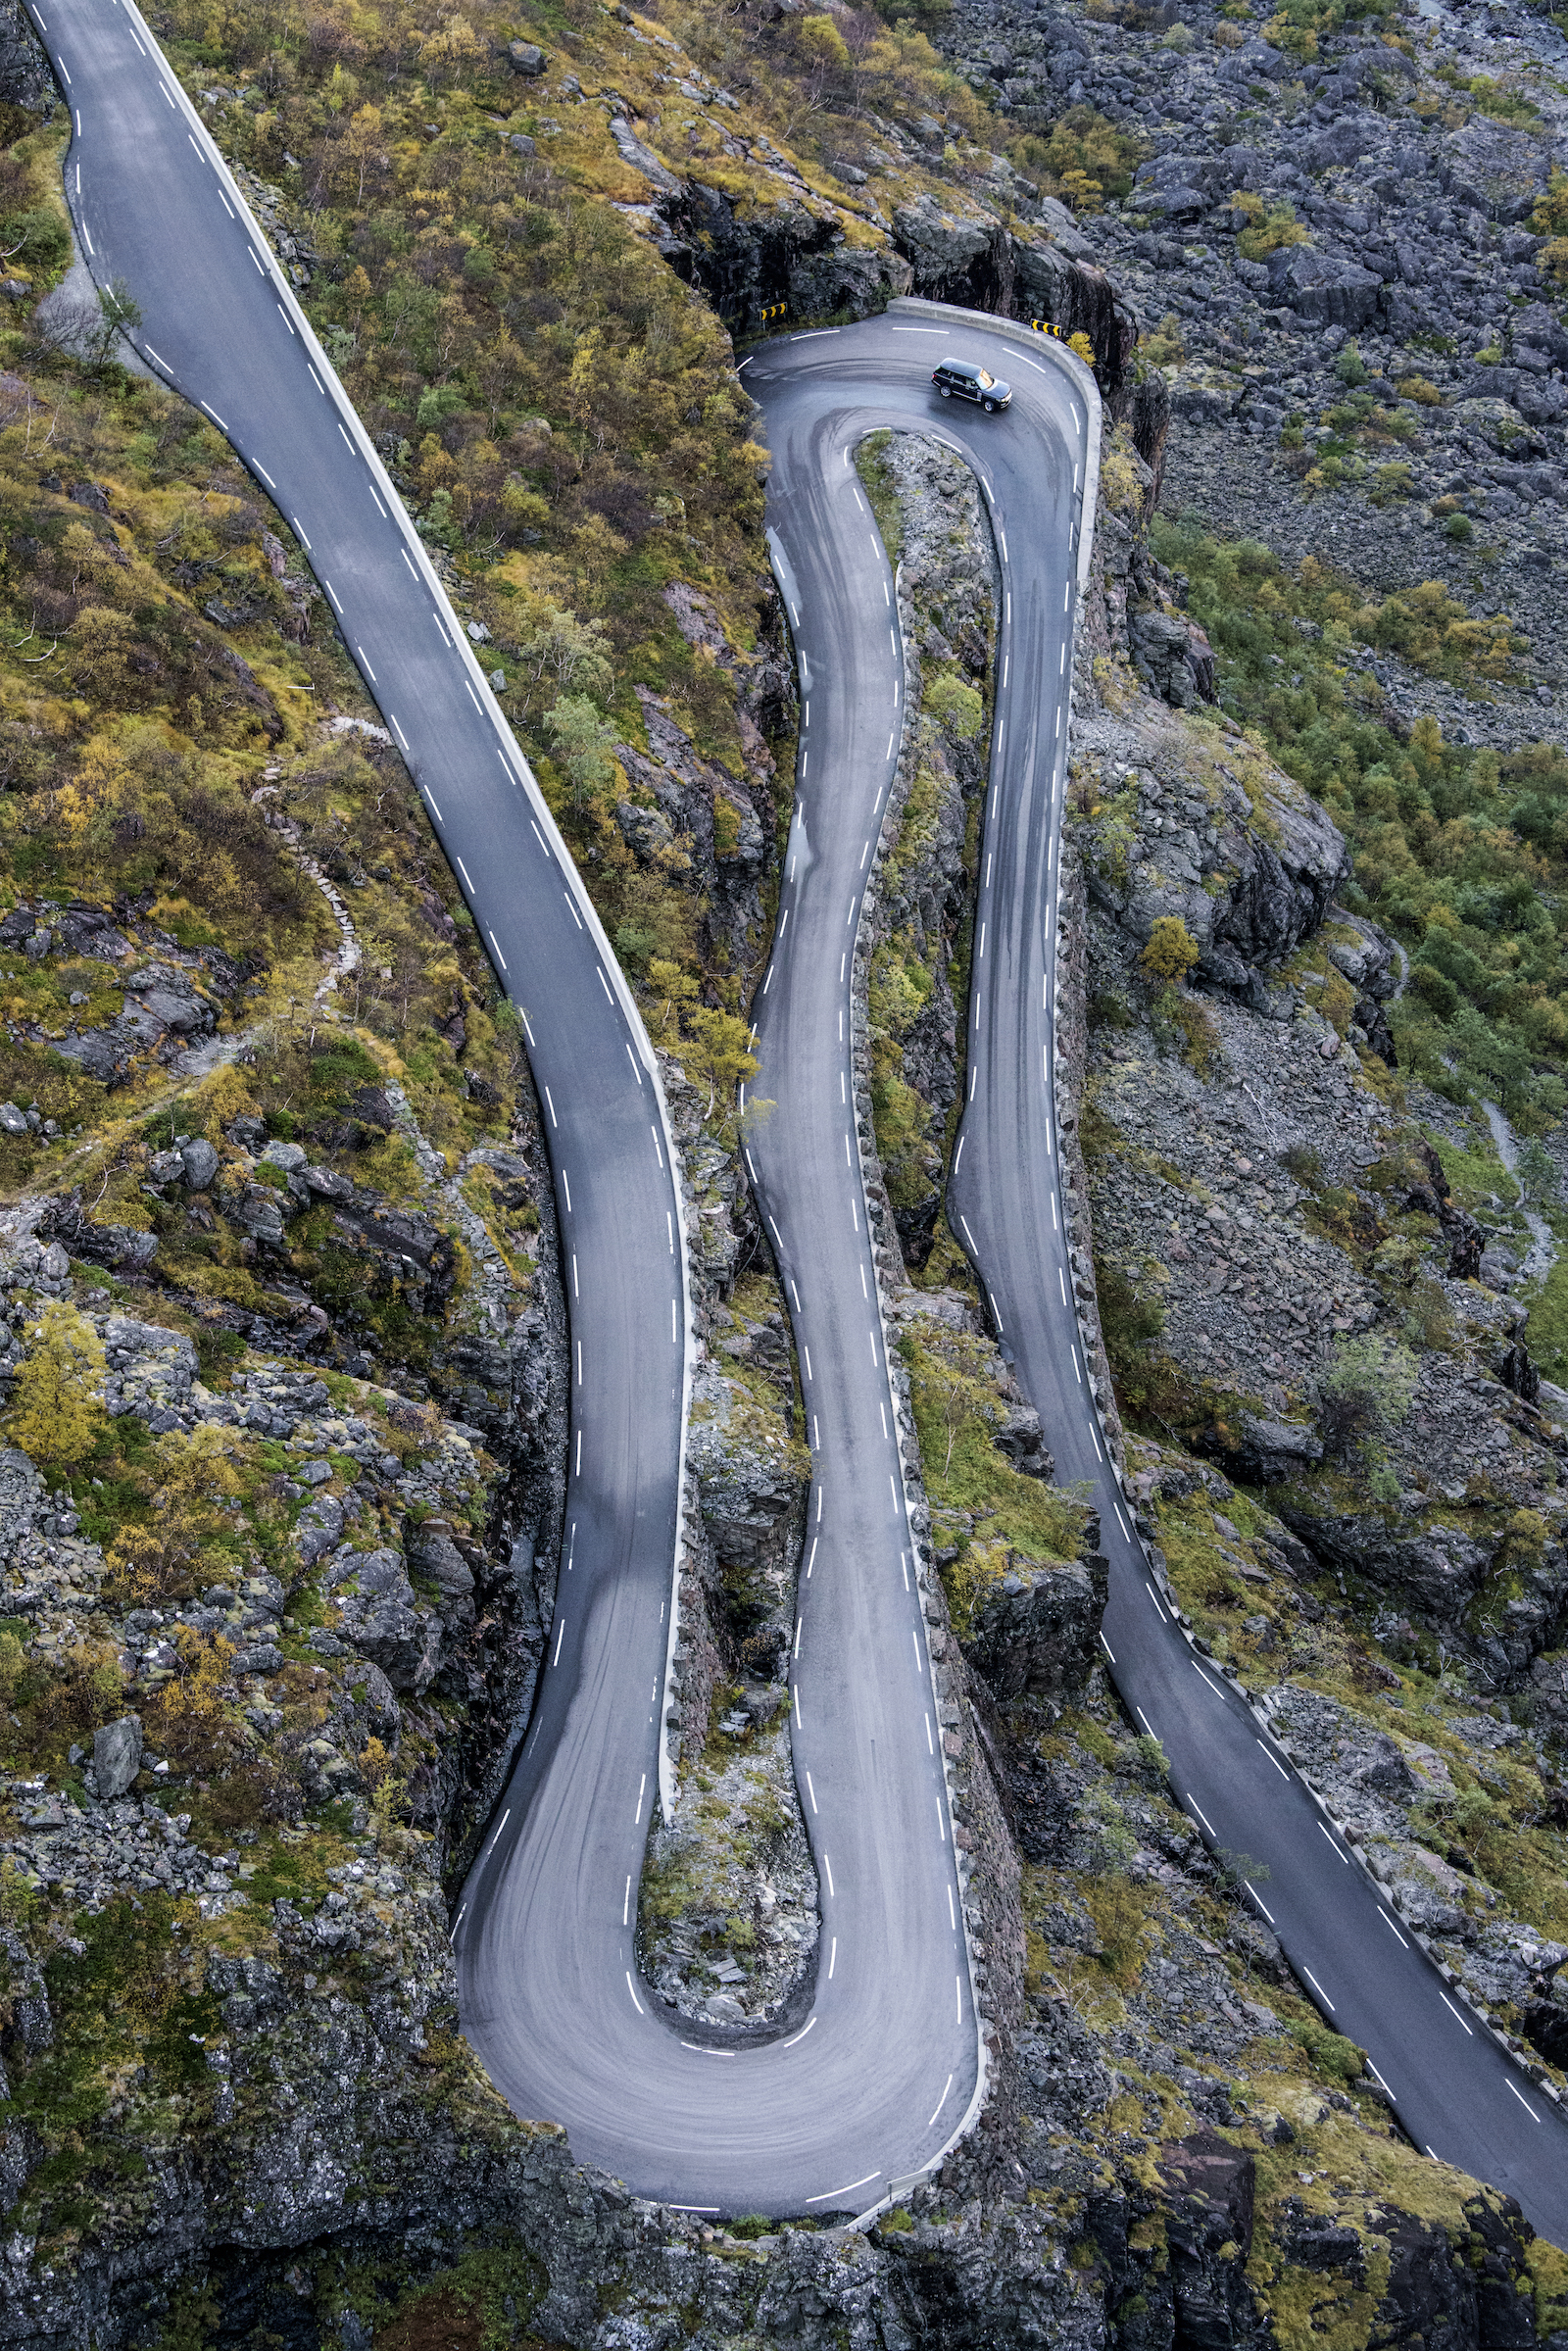 NORWAY. 2016. Trollstigen.  The famous Trollstigen road, a series of switchbacks winding its way through a steep cliffside near Åndalsnes. Photographed on assignment from Land Rover.